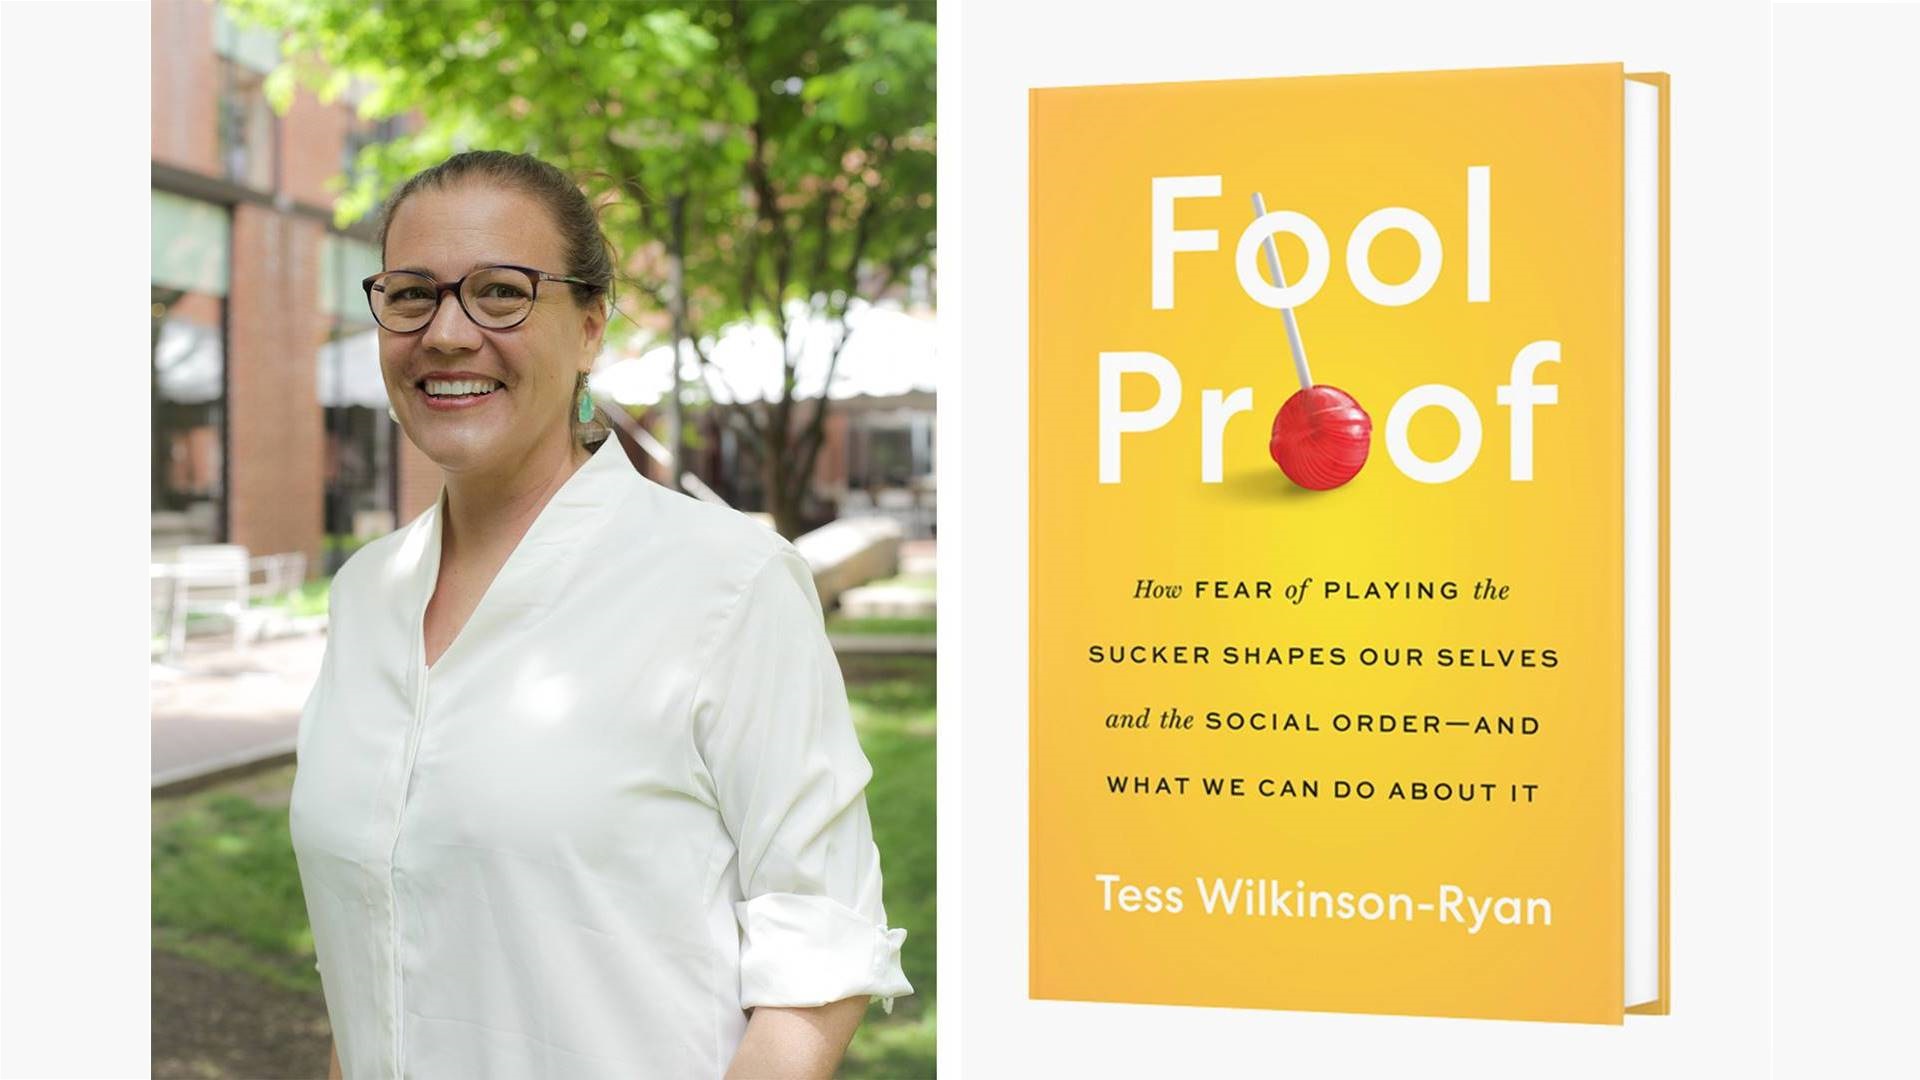 Tess Wilkinson-Ryan: The psychology of playing the fool